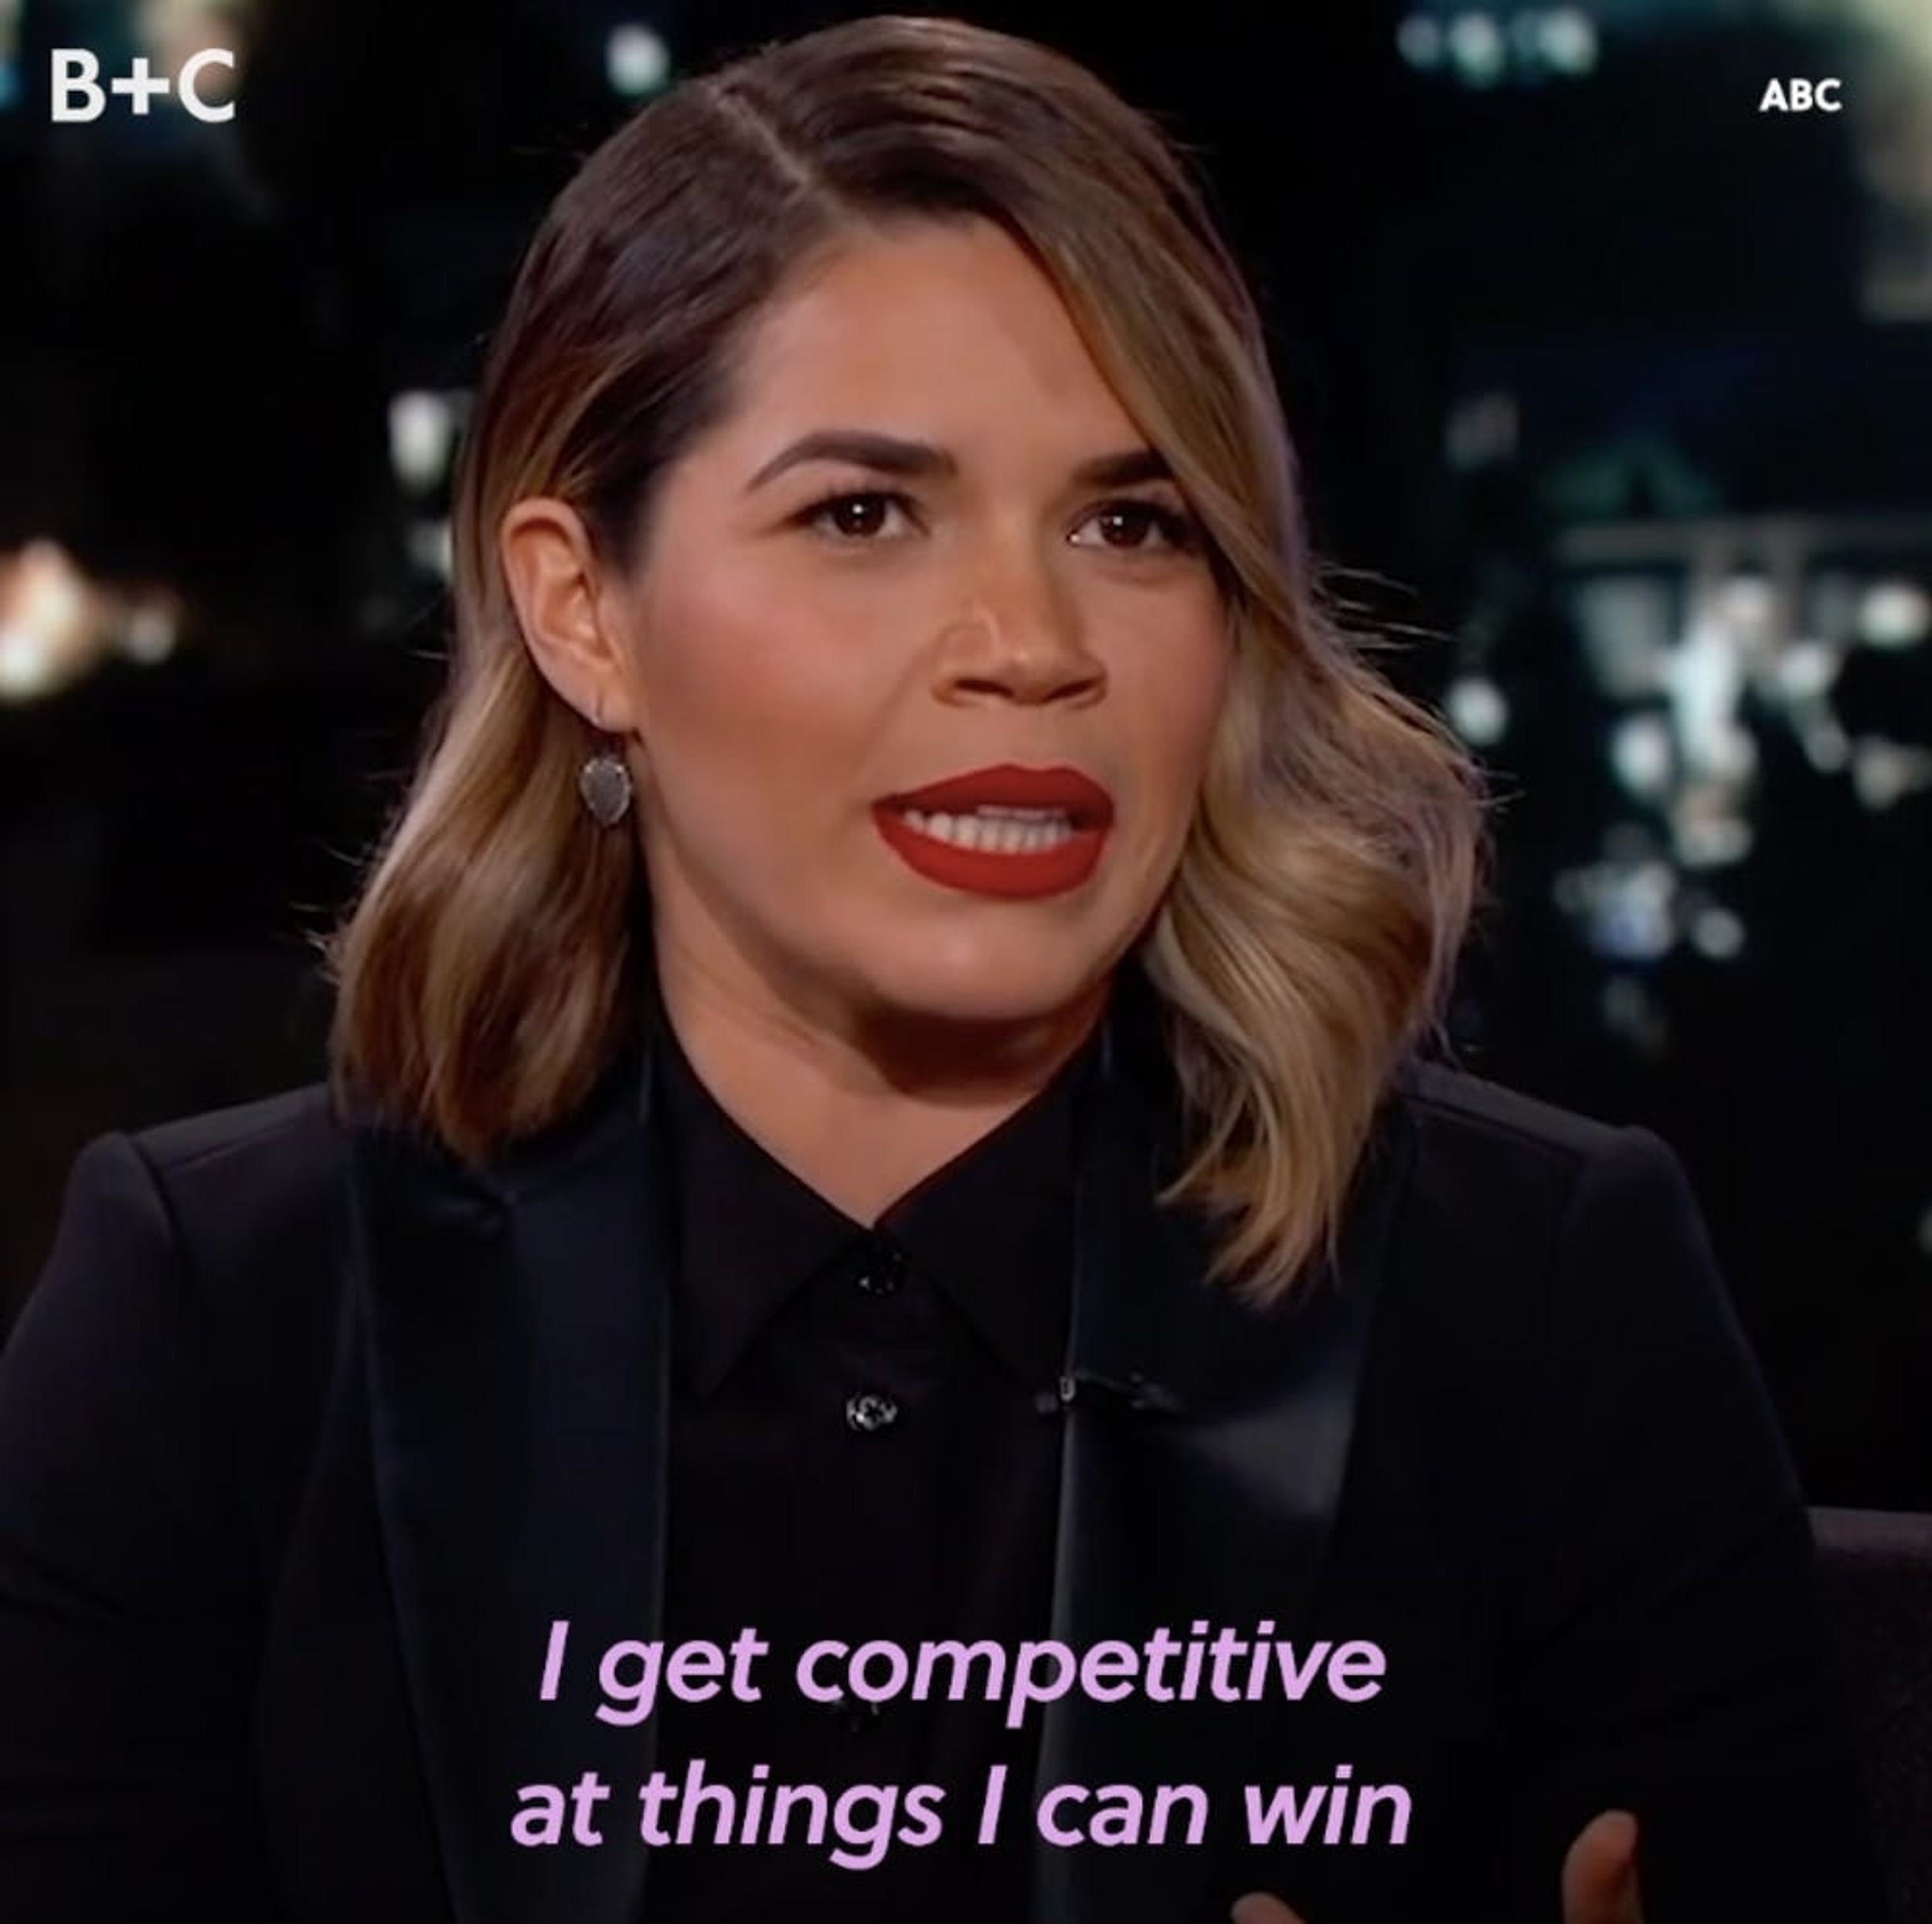 Watch These Celebrities Get Competitive Over the Smallest Things